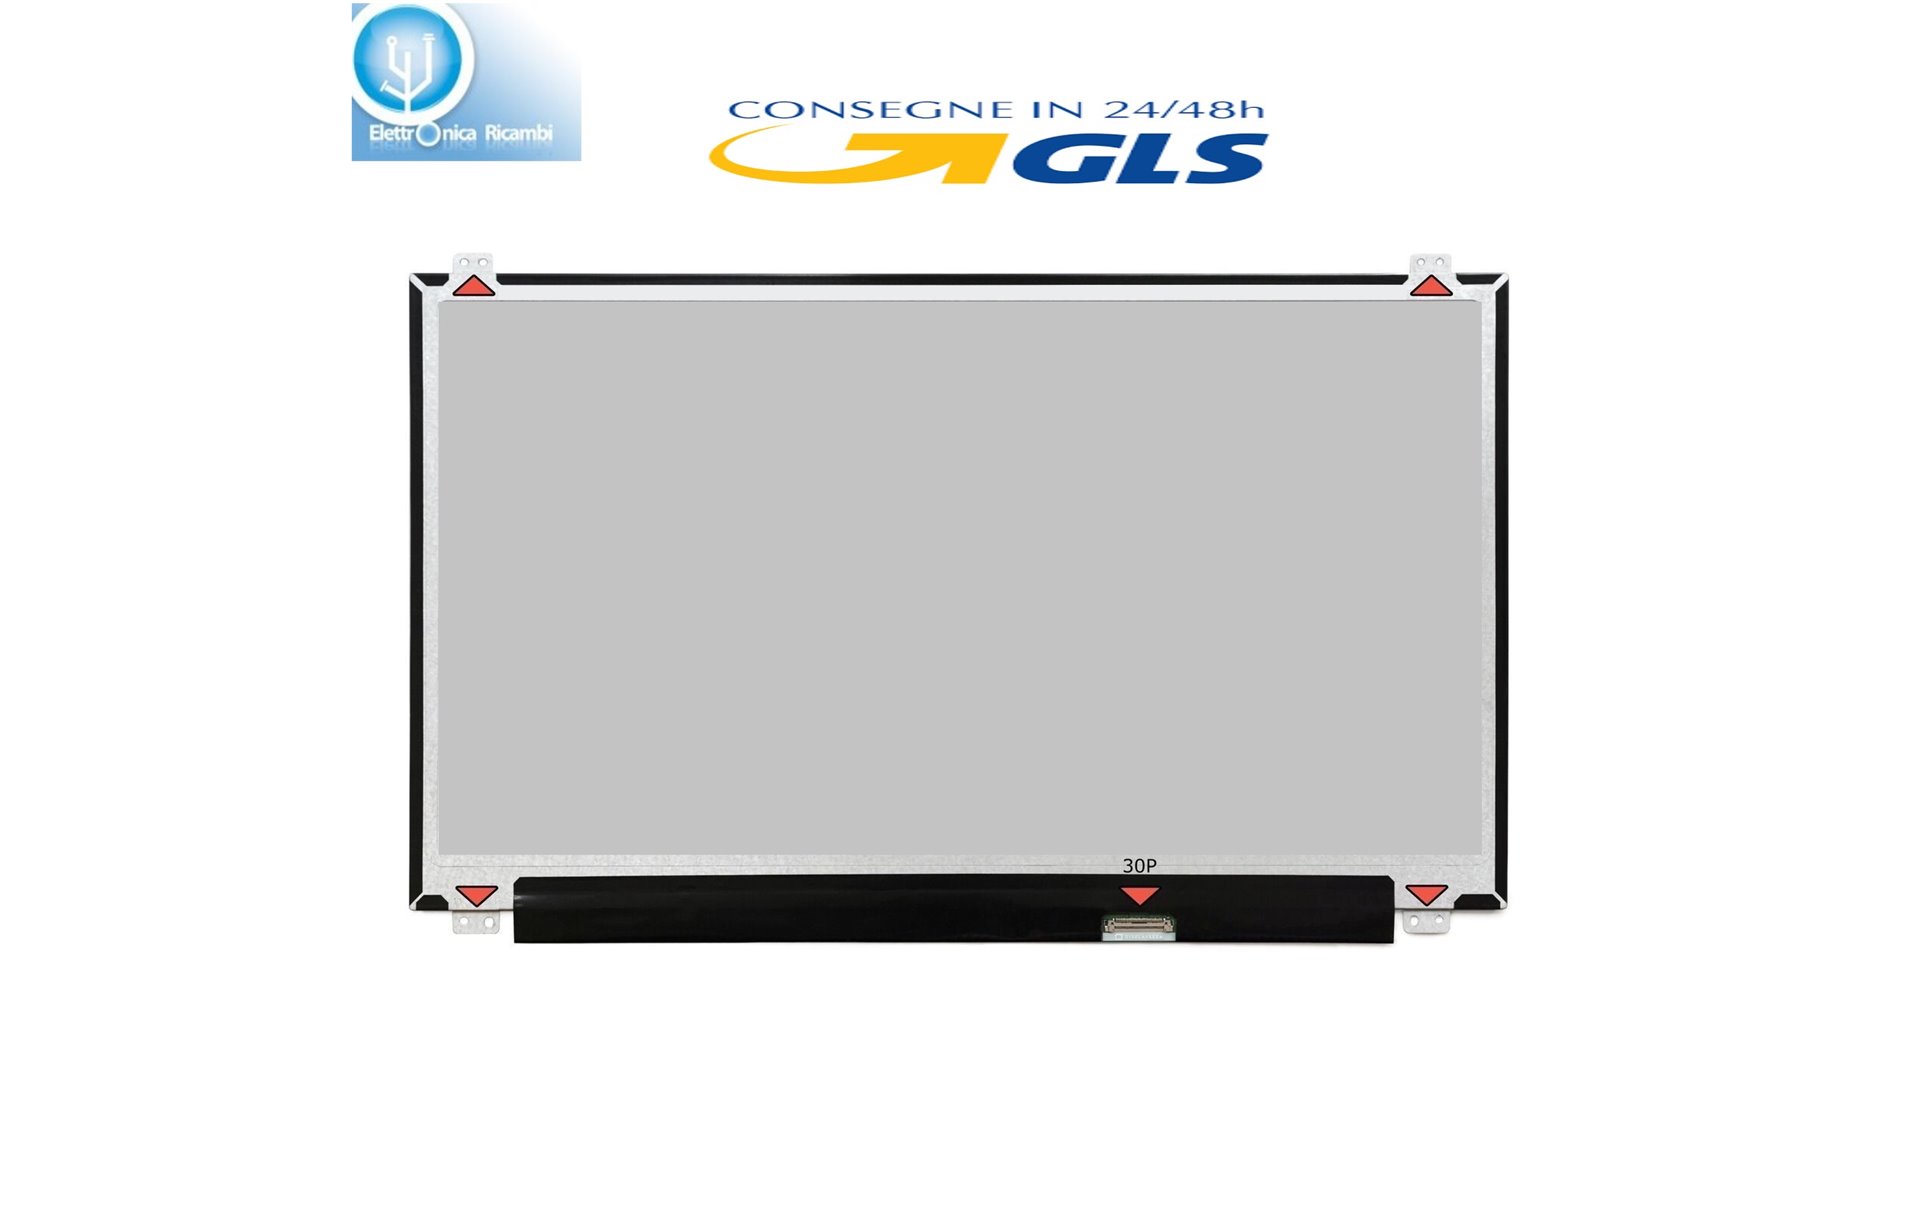 Display LCD ASUS FX570ZD SERIES Schermo 15,6" 1920x1080 LED 30 pin IPS